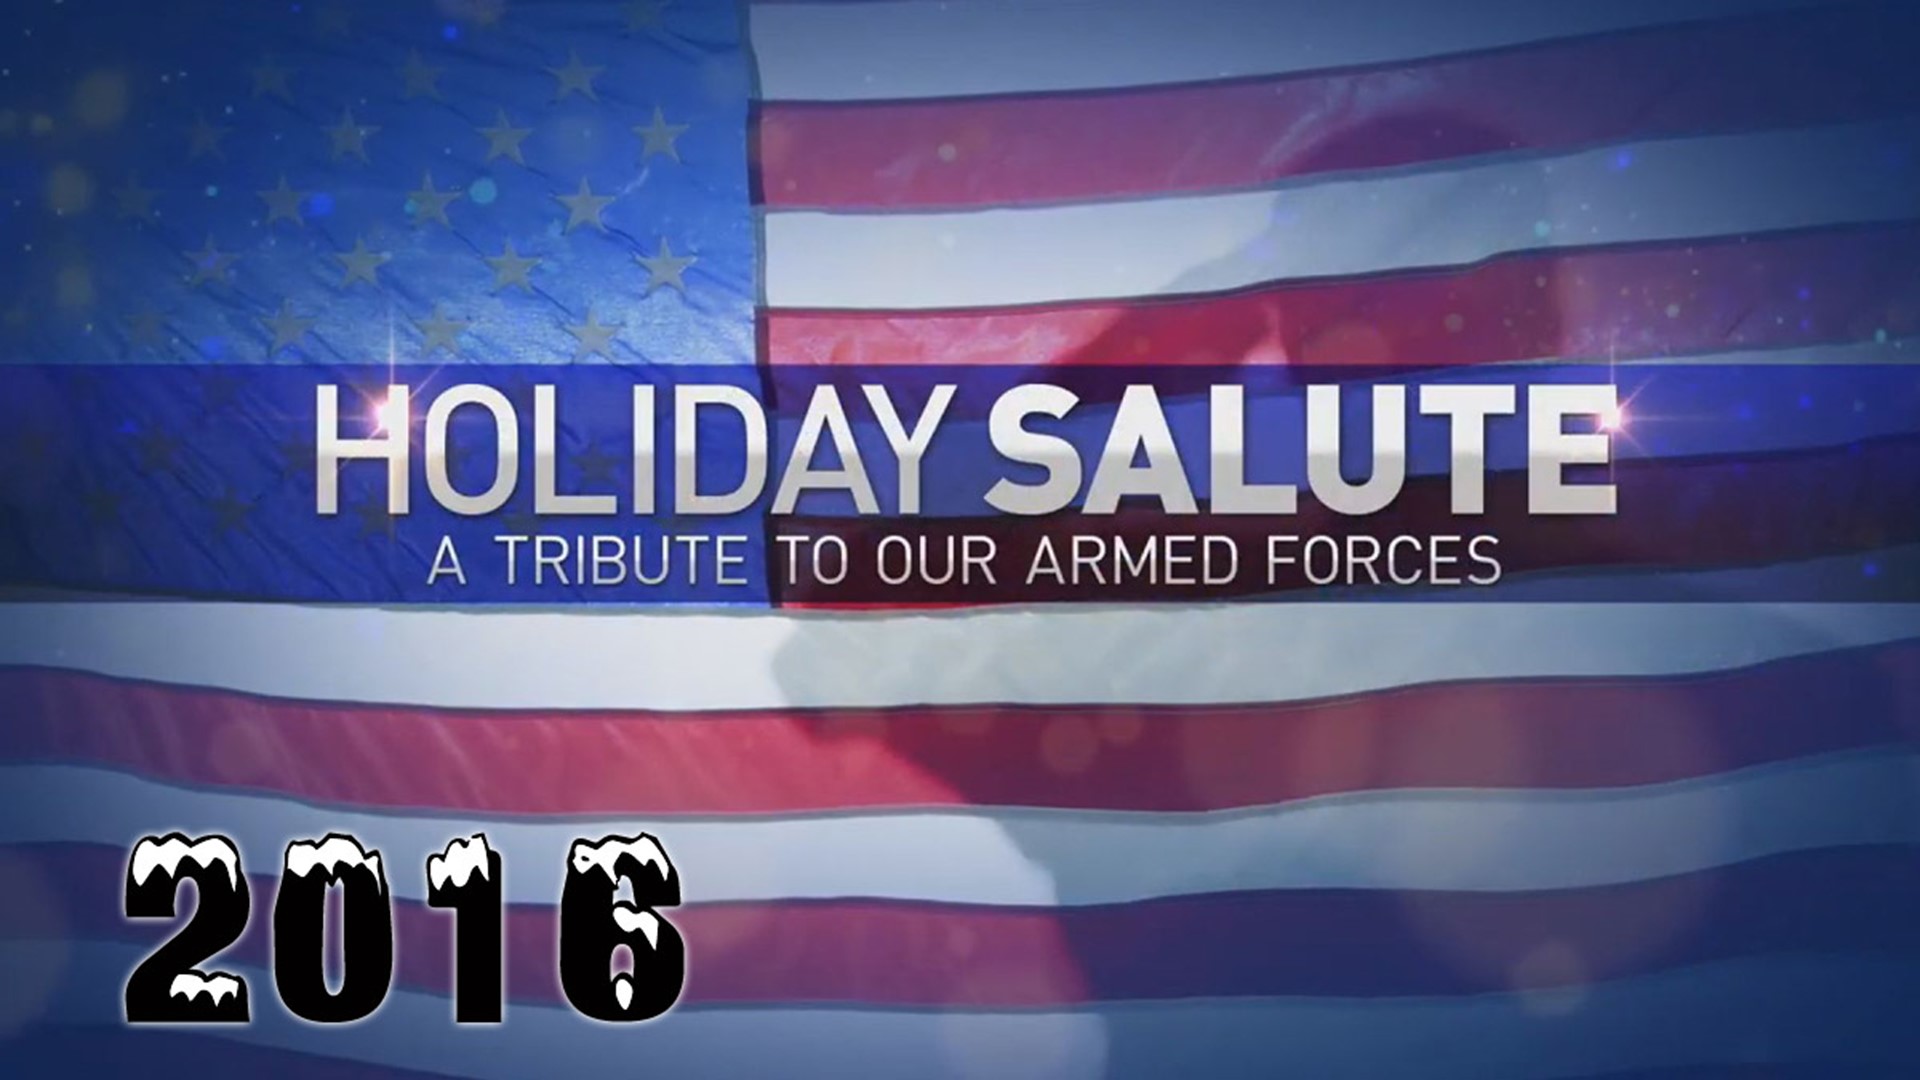 For more than 35 years, 13News Now has honored our military men & women with an annual holiday special. This is the 31st annual Holiday Salute, which aired in 2016.